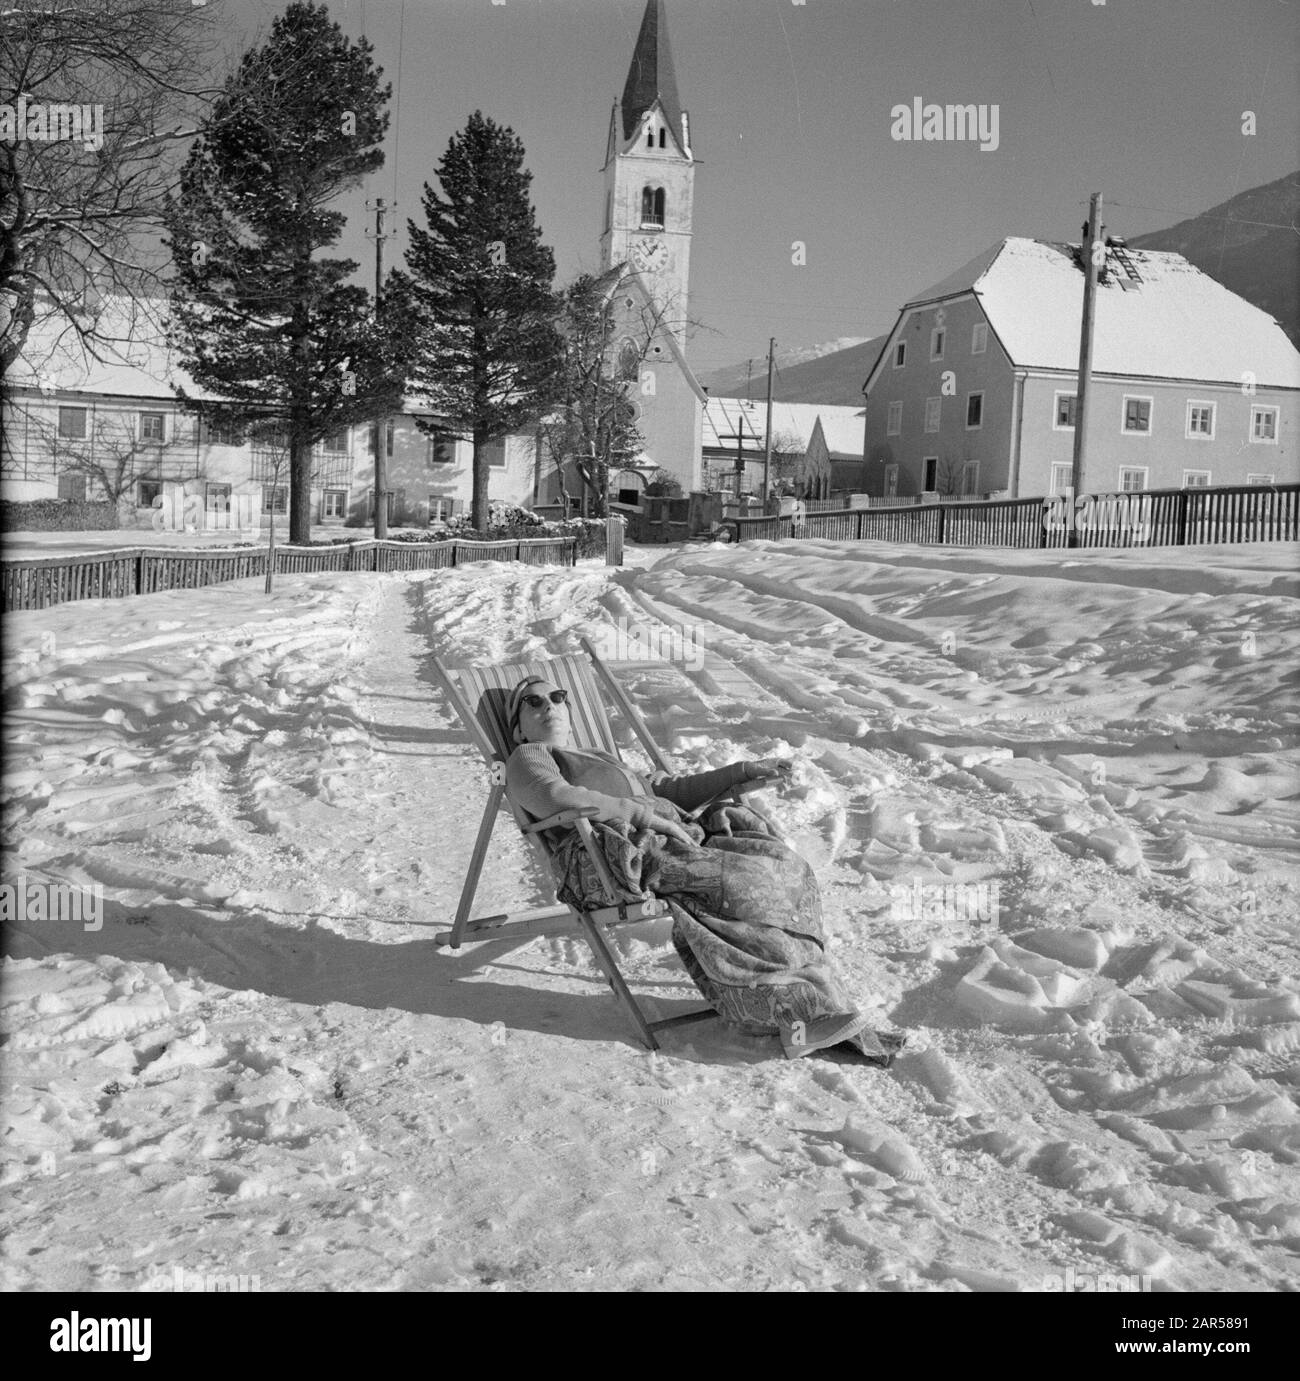 Winter in Tyrol  Hilde Eschen is sunbathing in the snow Date: January 1960 Location: Austria, Sistrans, Tyrol Keywords: mountains, villages, snow, holiday, winter Personal name: Eschen, Hilde Stock Photo